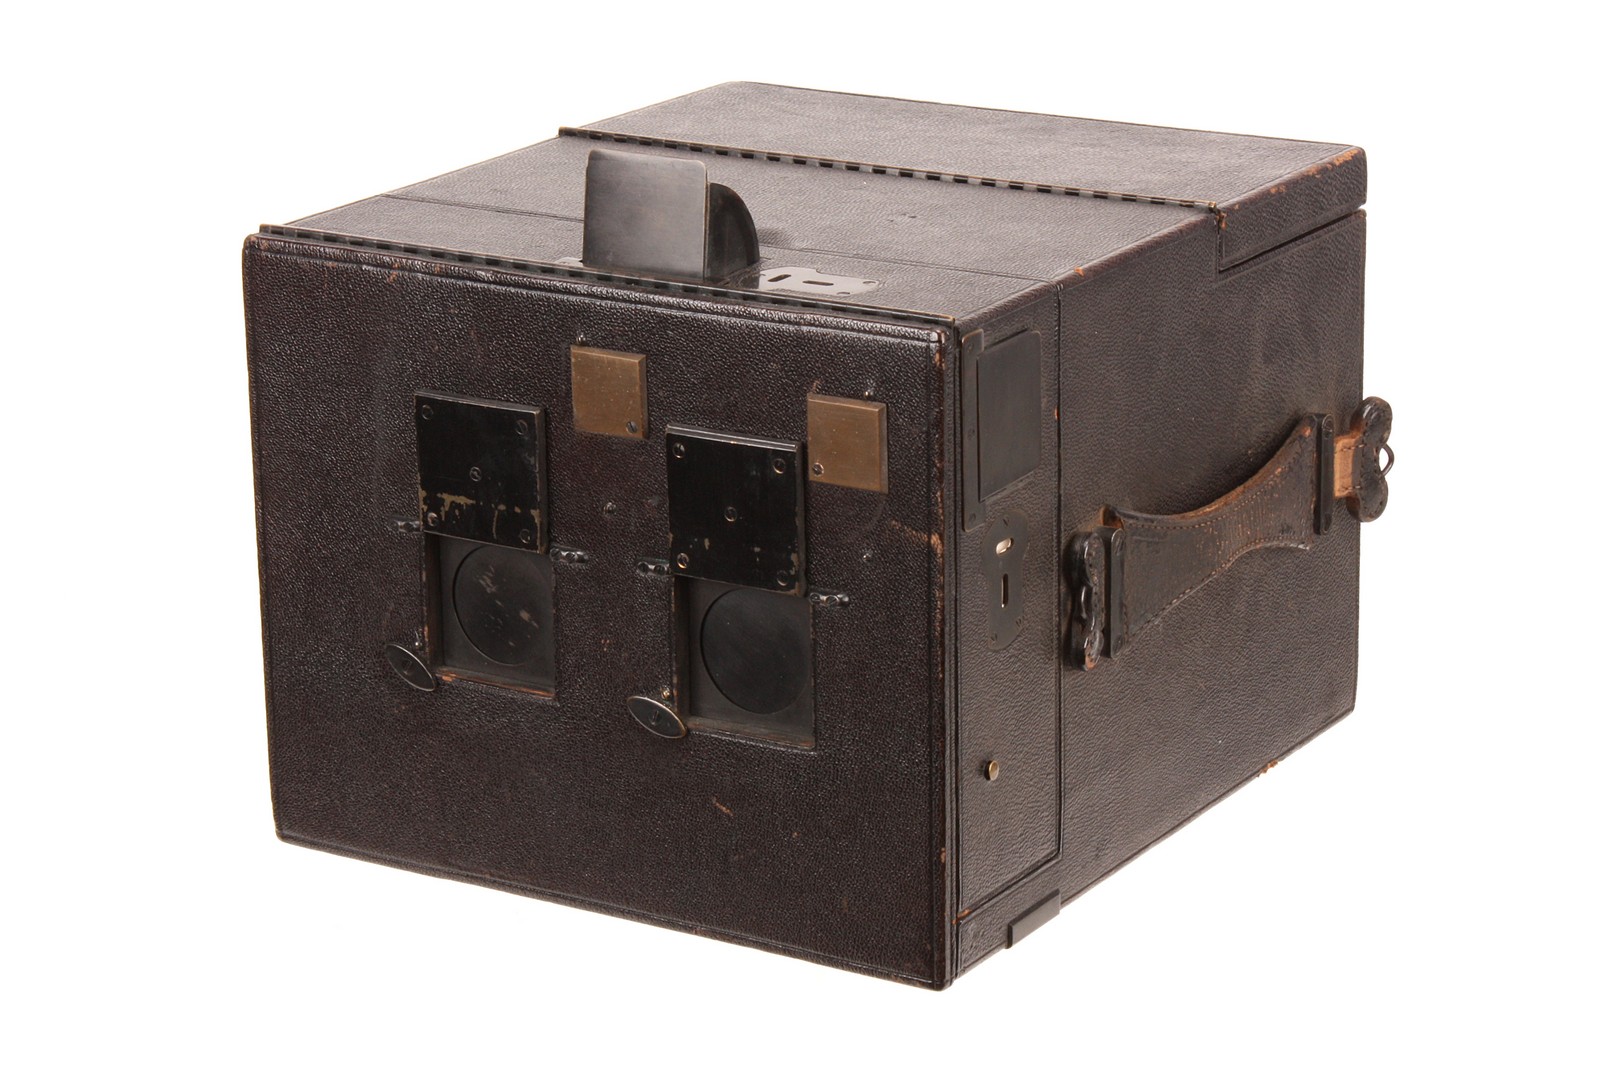 A Newman & Guardia Special Stereoscopic Stereo Detective Camera, 10x15cm, serial no. SS662, with